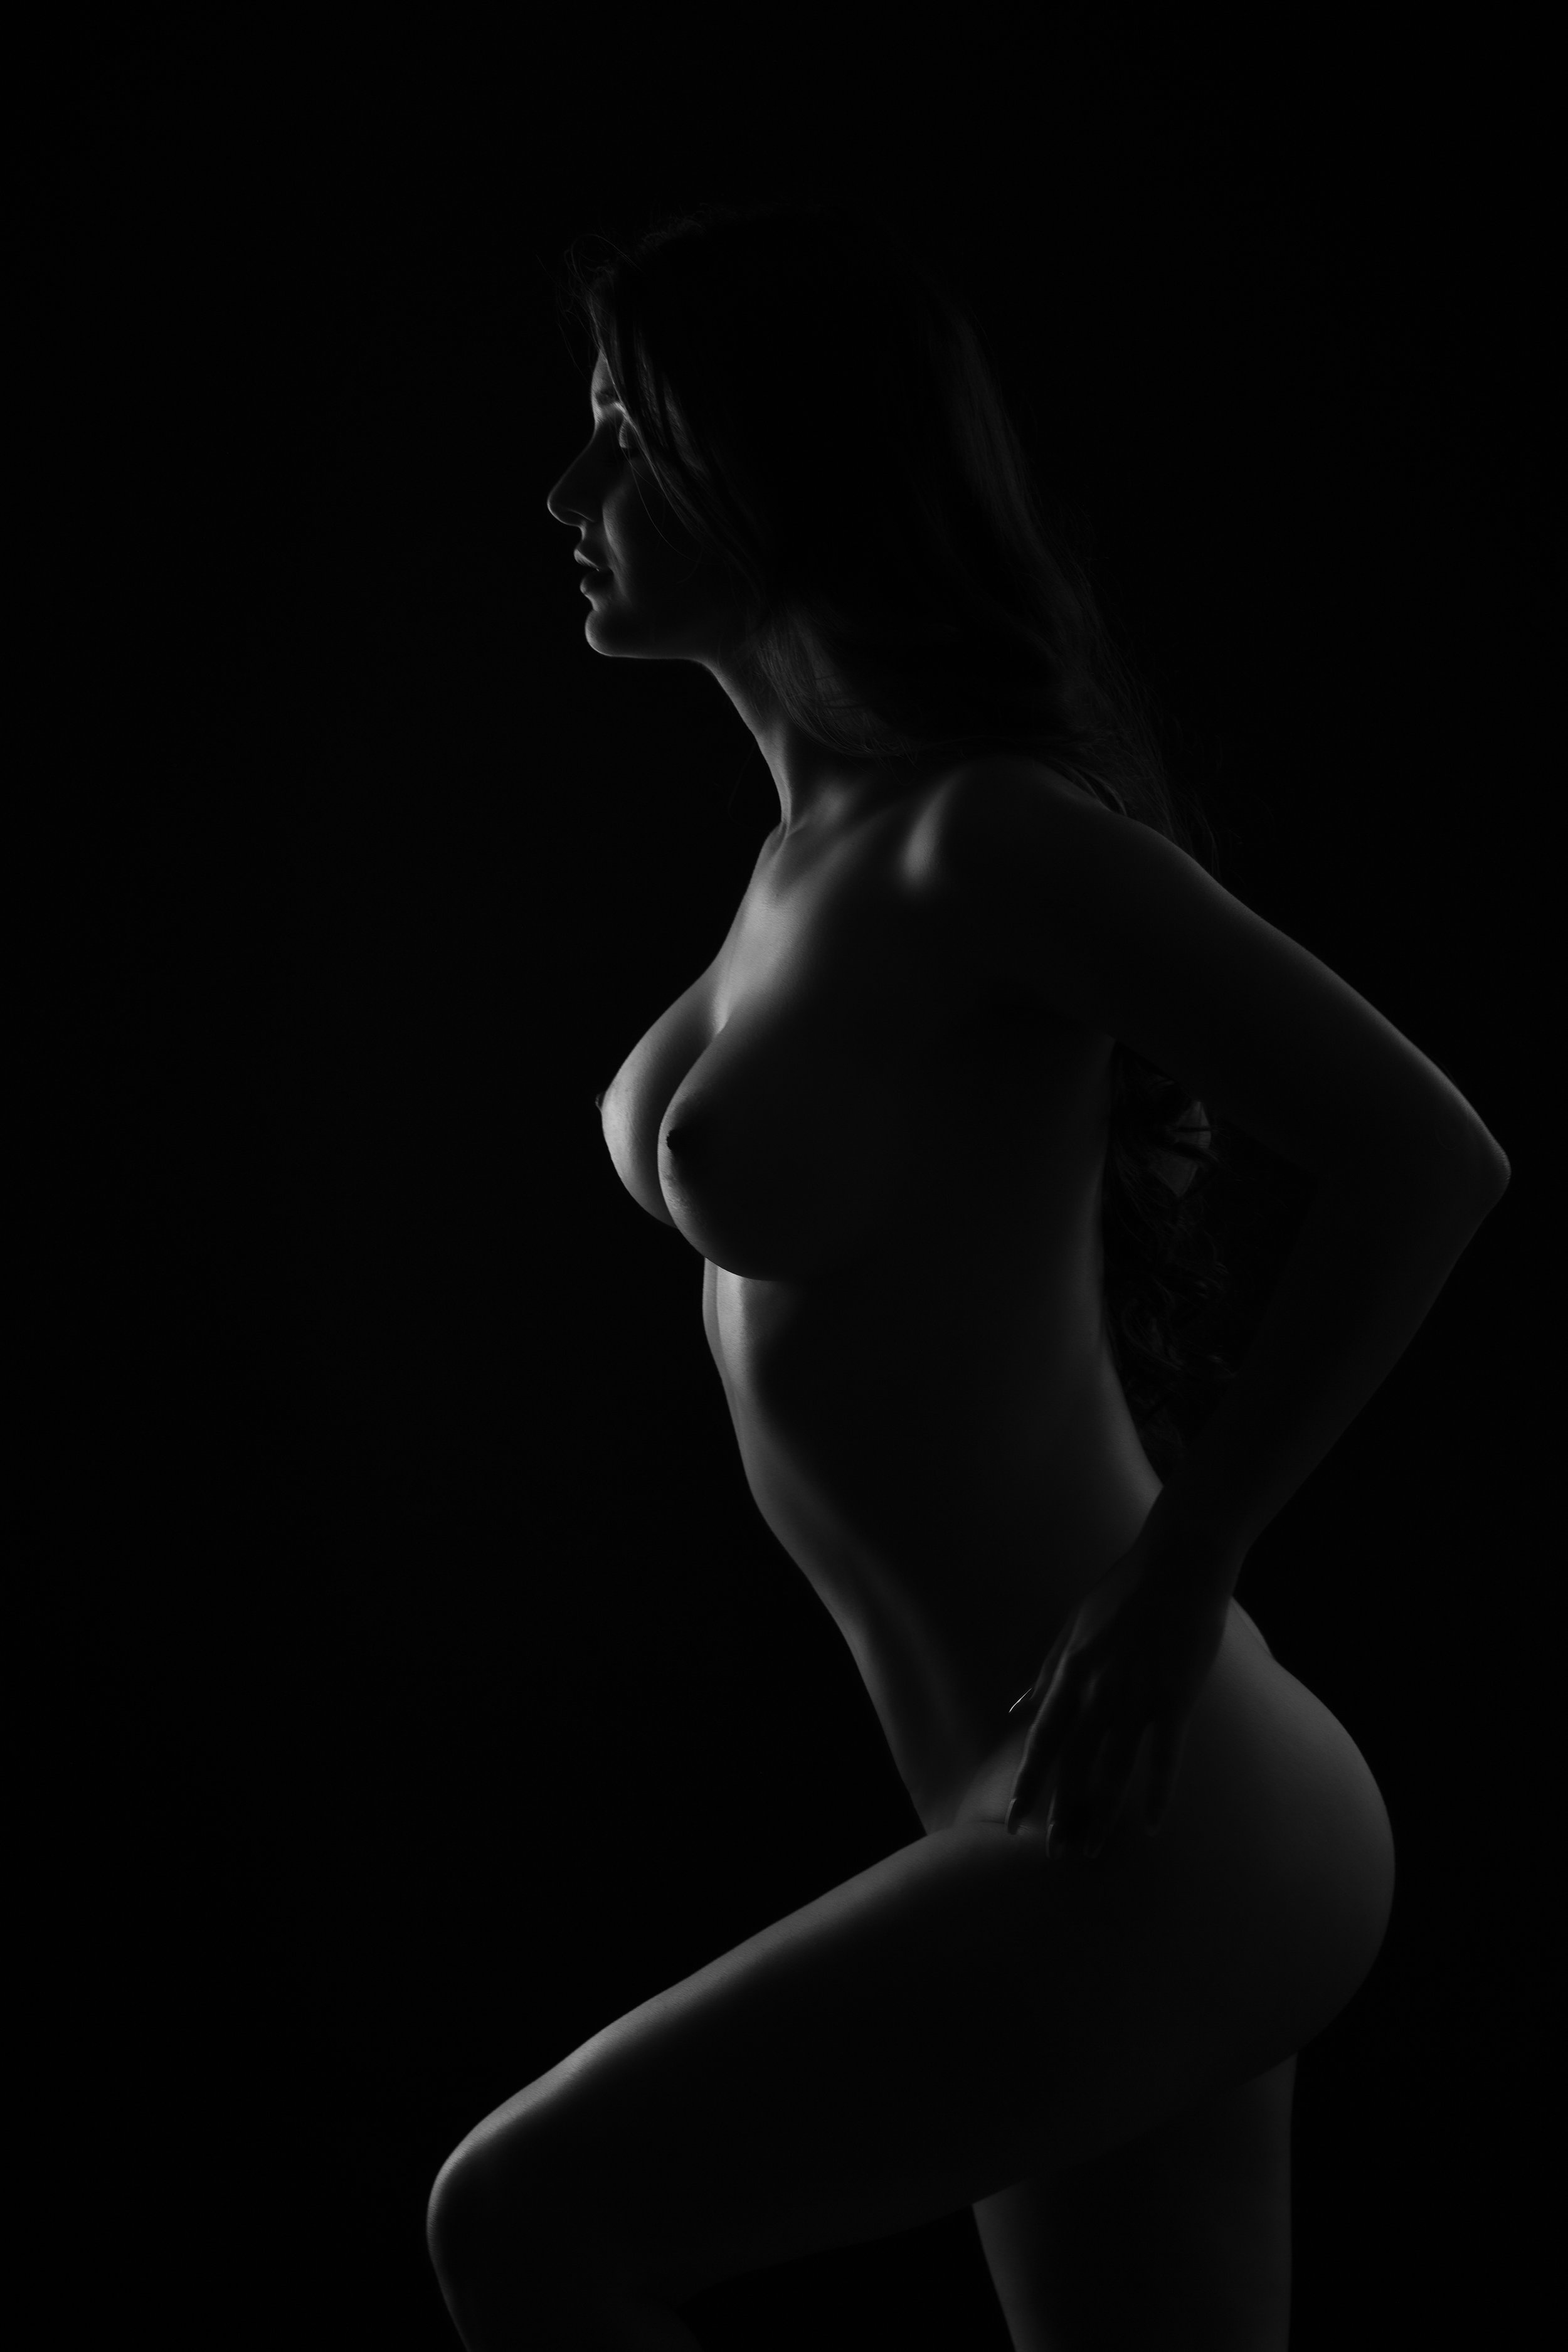 Boudoir and Nude Photography workshop 